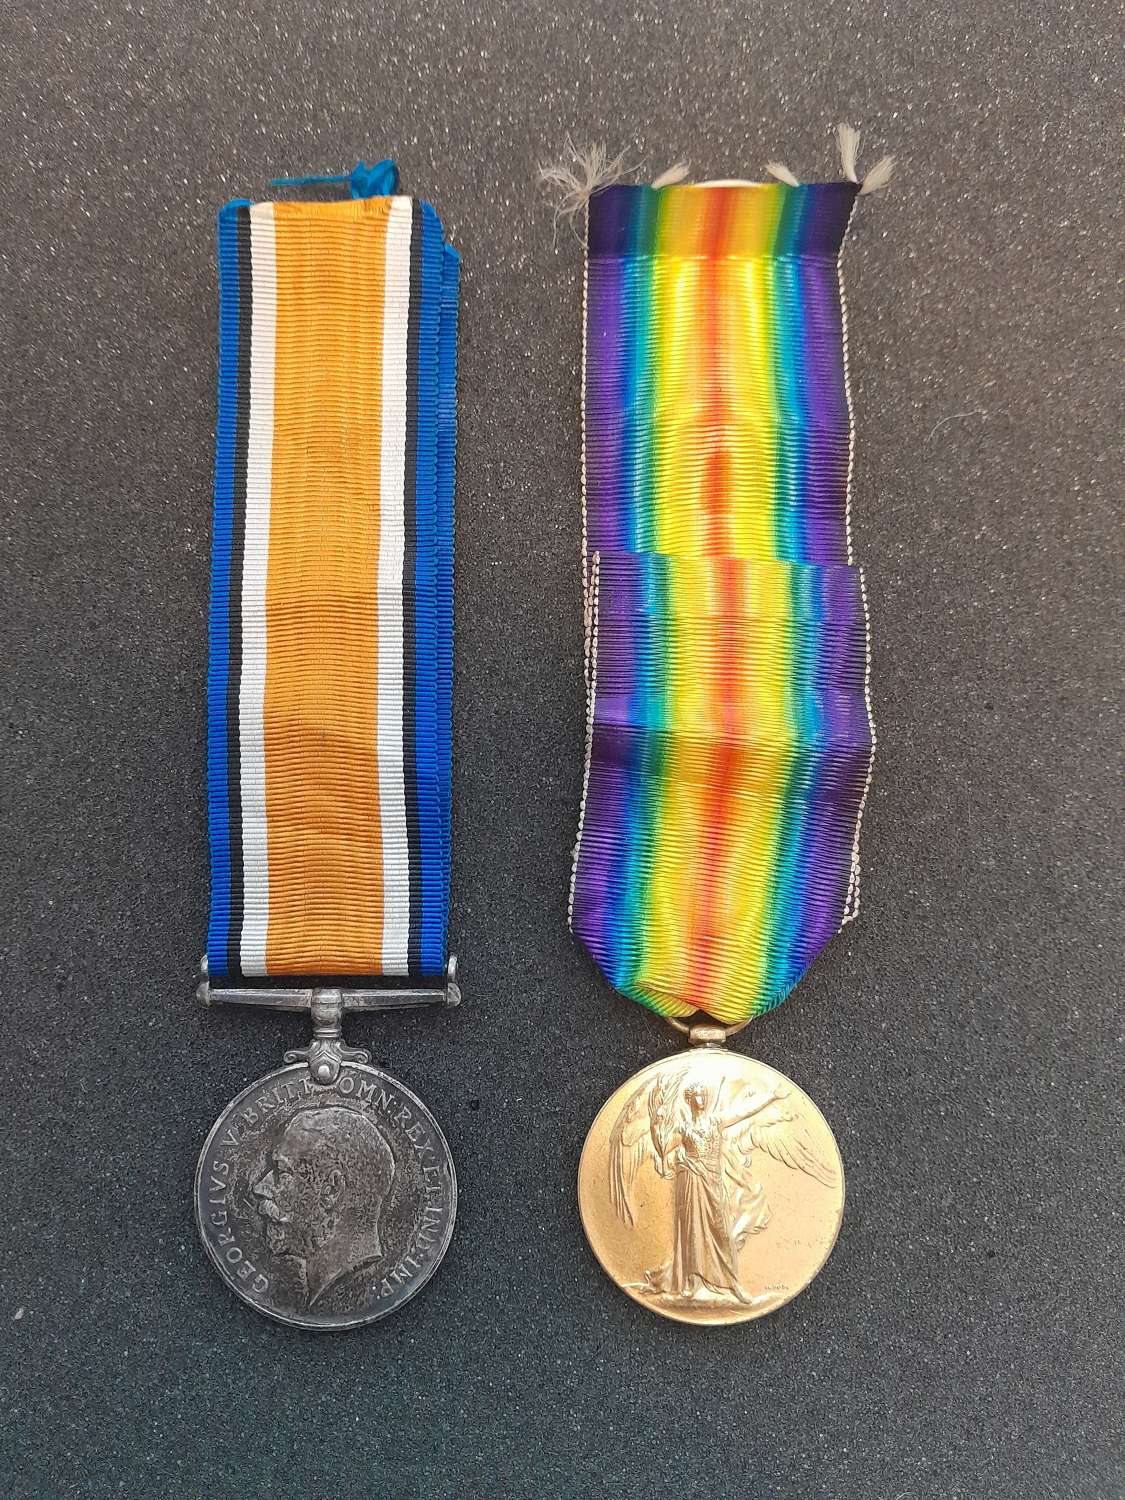 World War One medals 13th London Regiment 6014 PTE J.E. Cannell 13-LON